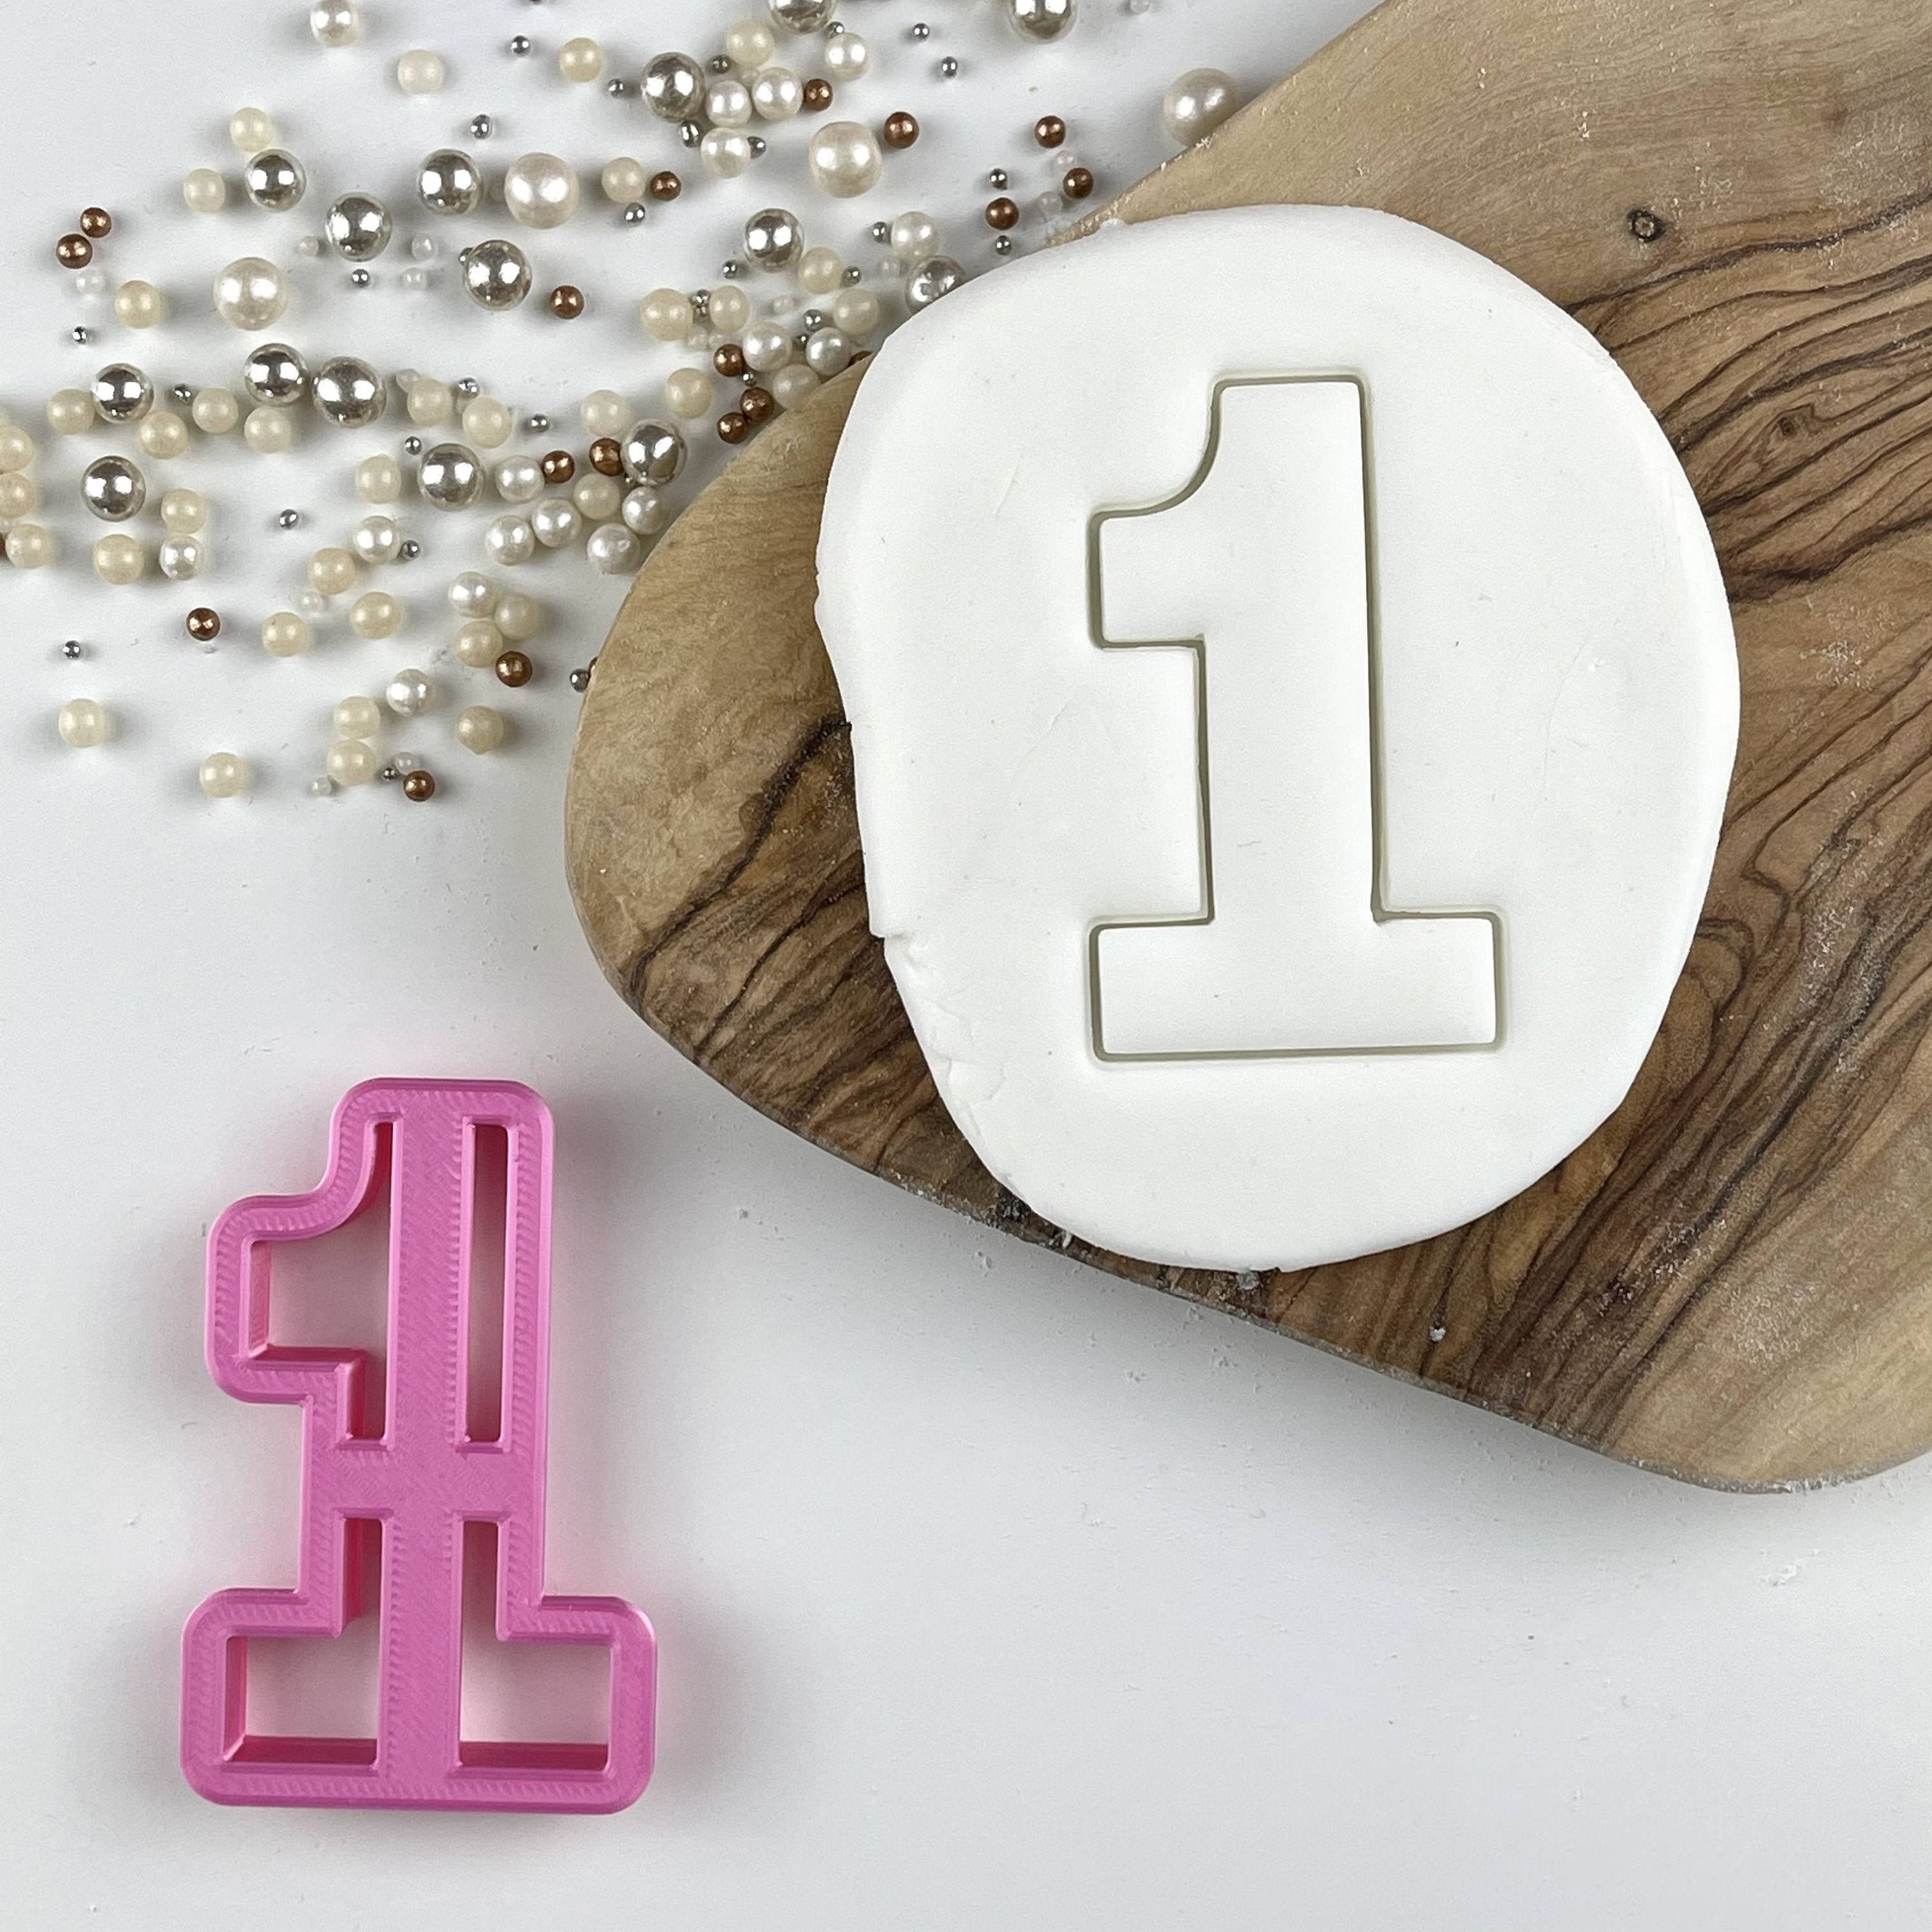 Number Cookie Stamp Birthday Cookie Cutter Age Cookie Embosser Number Cookie Cutter Happy Number Cookie Cutter and Embosser